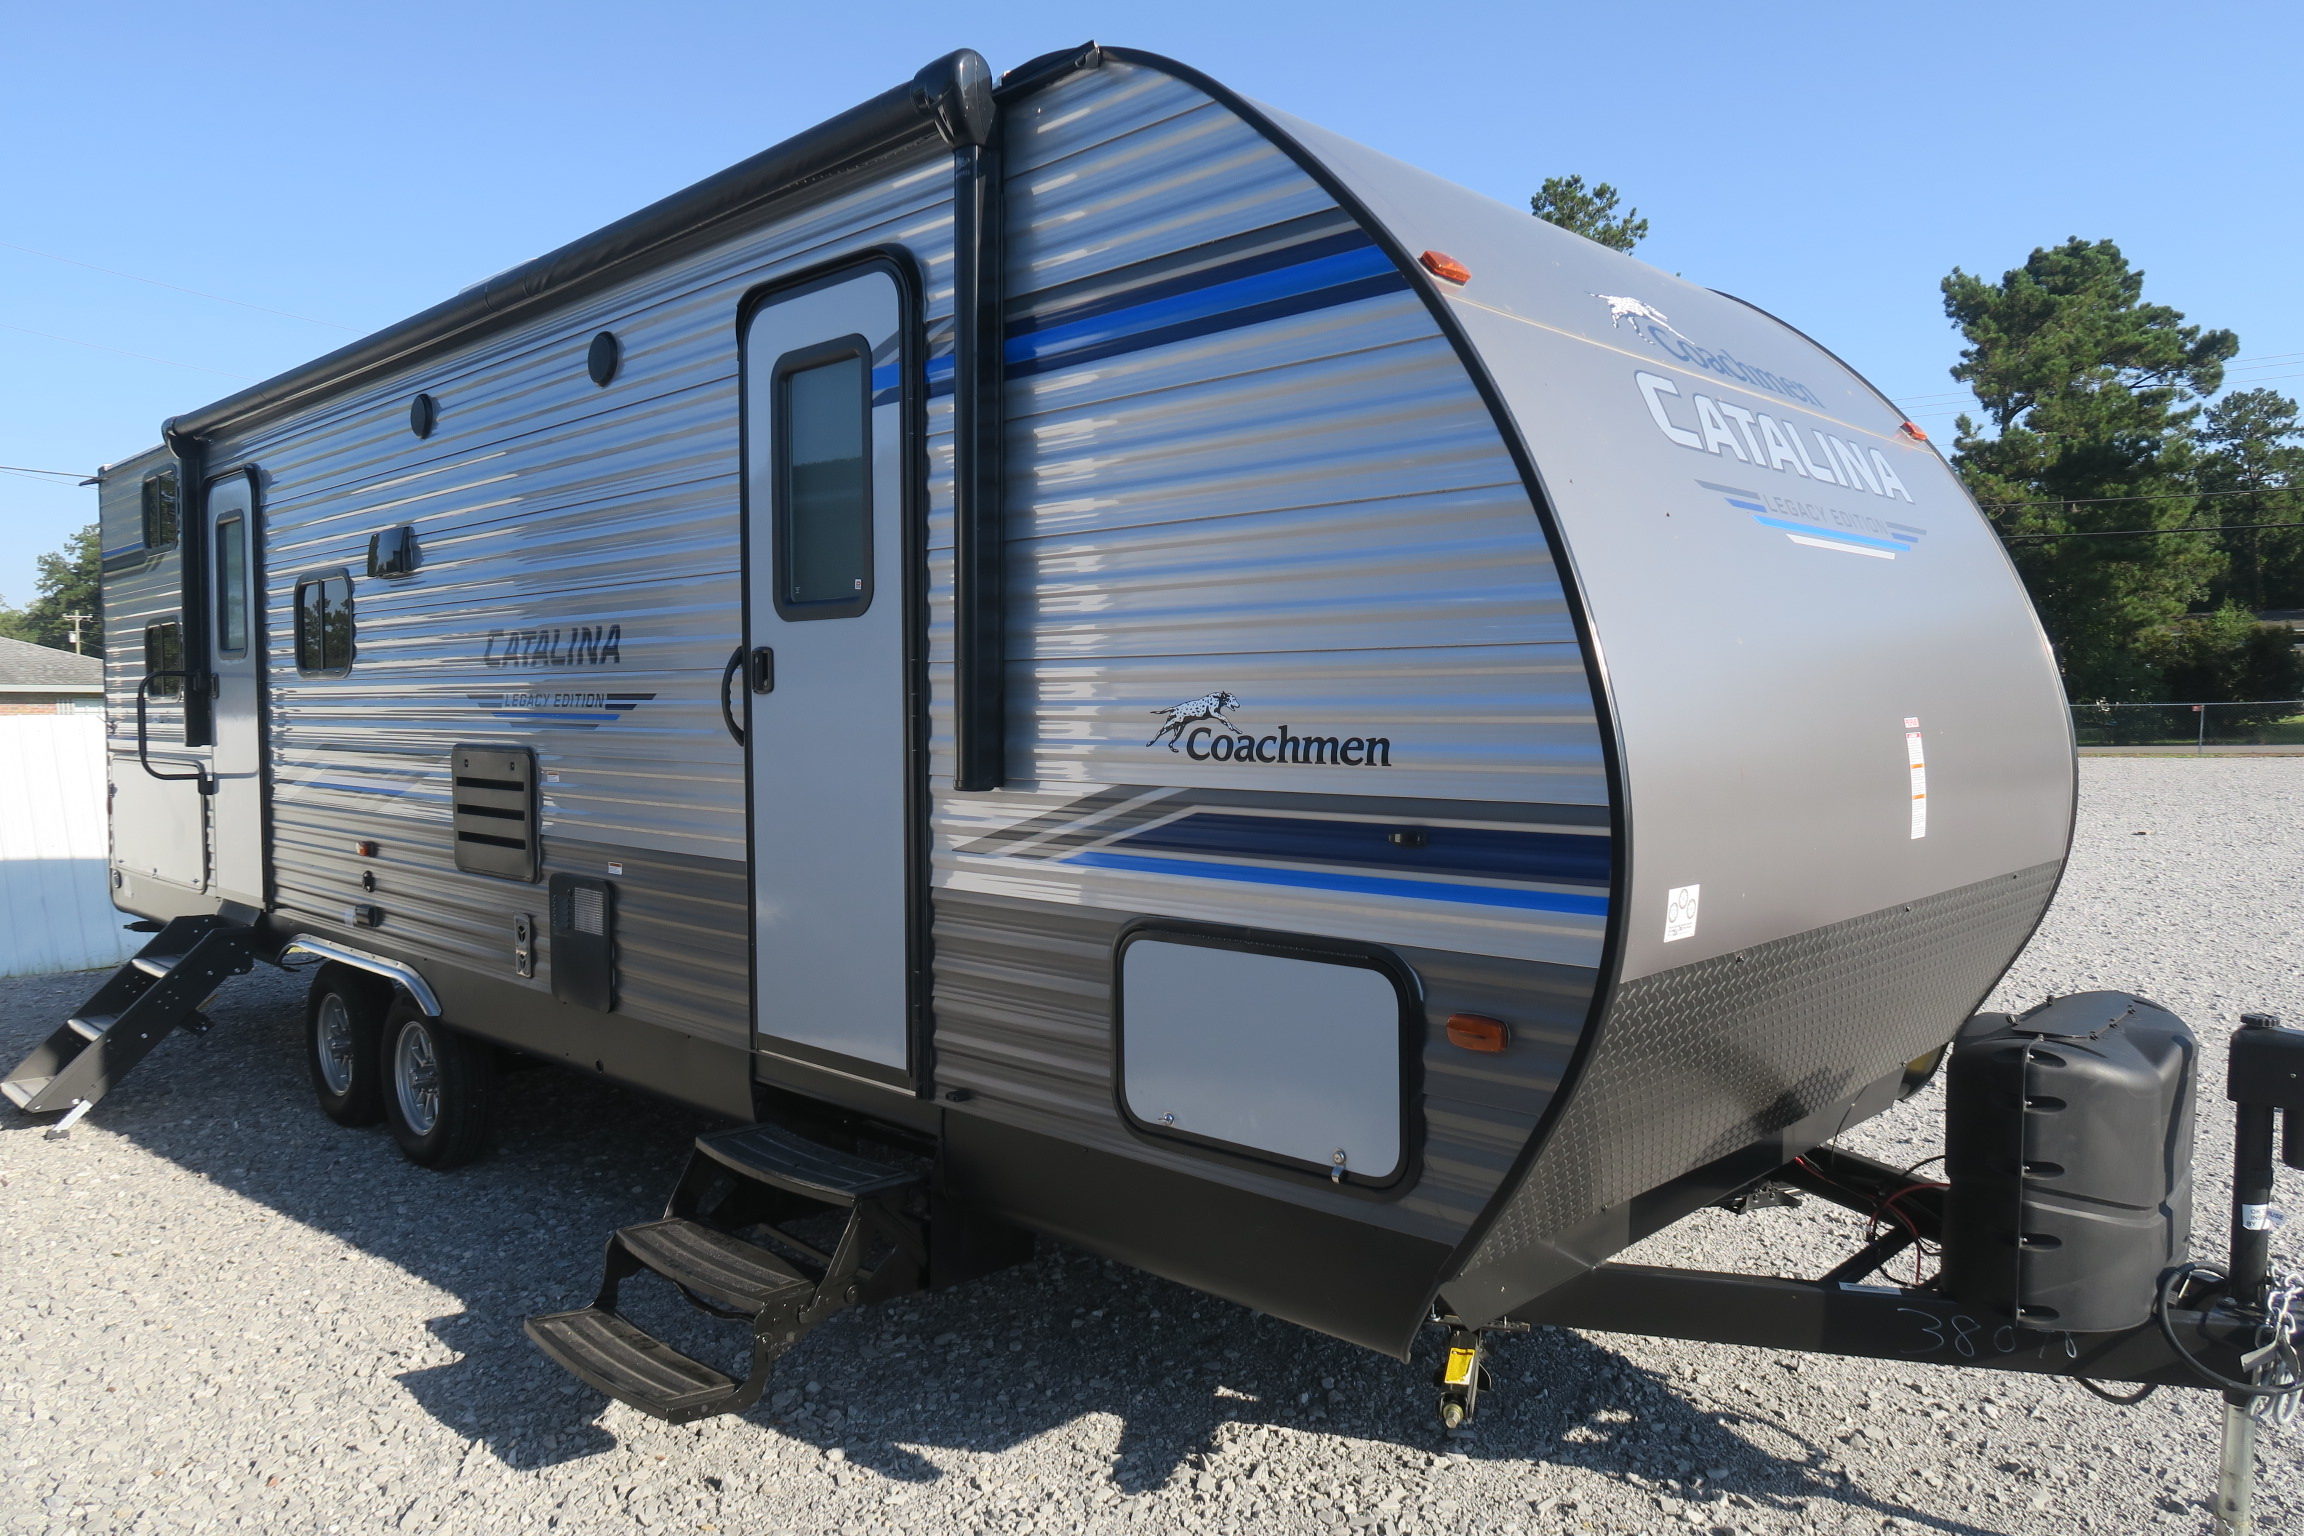 catalina legacy edition travel trailer